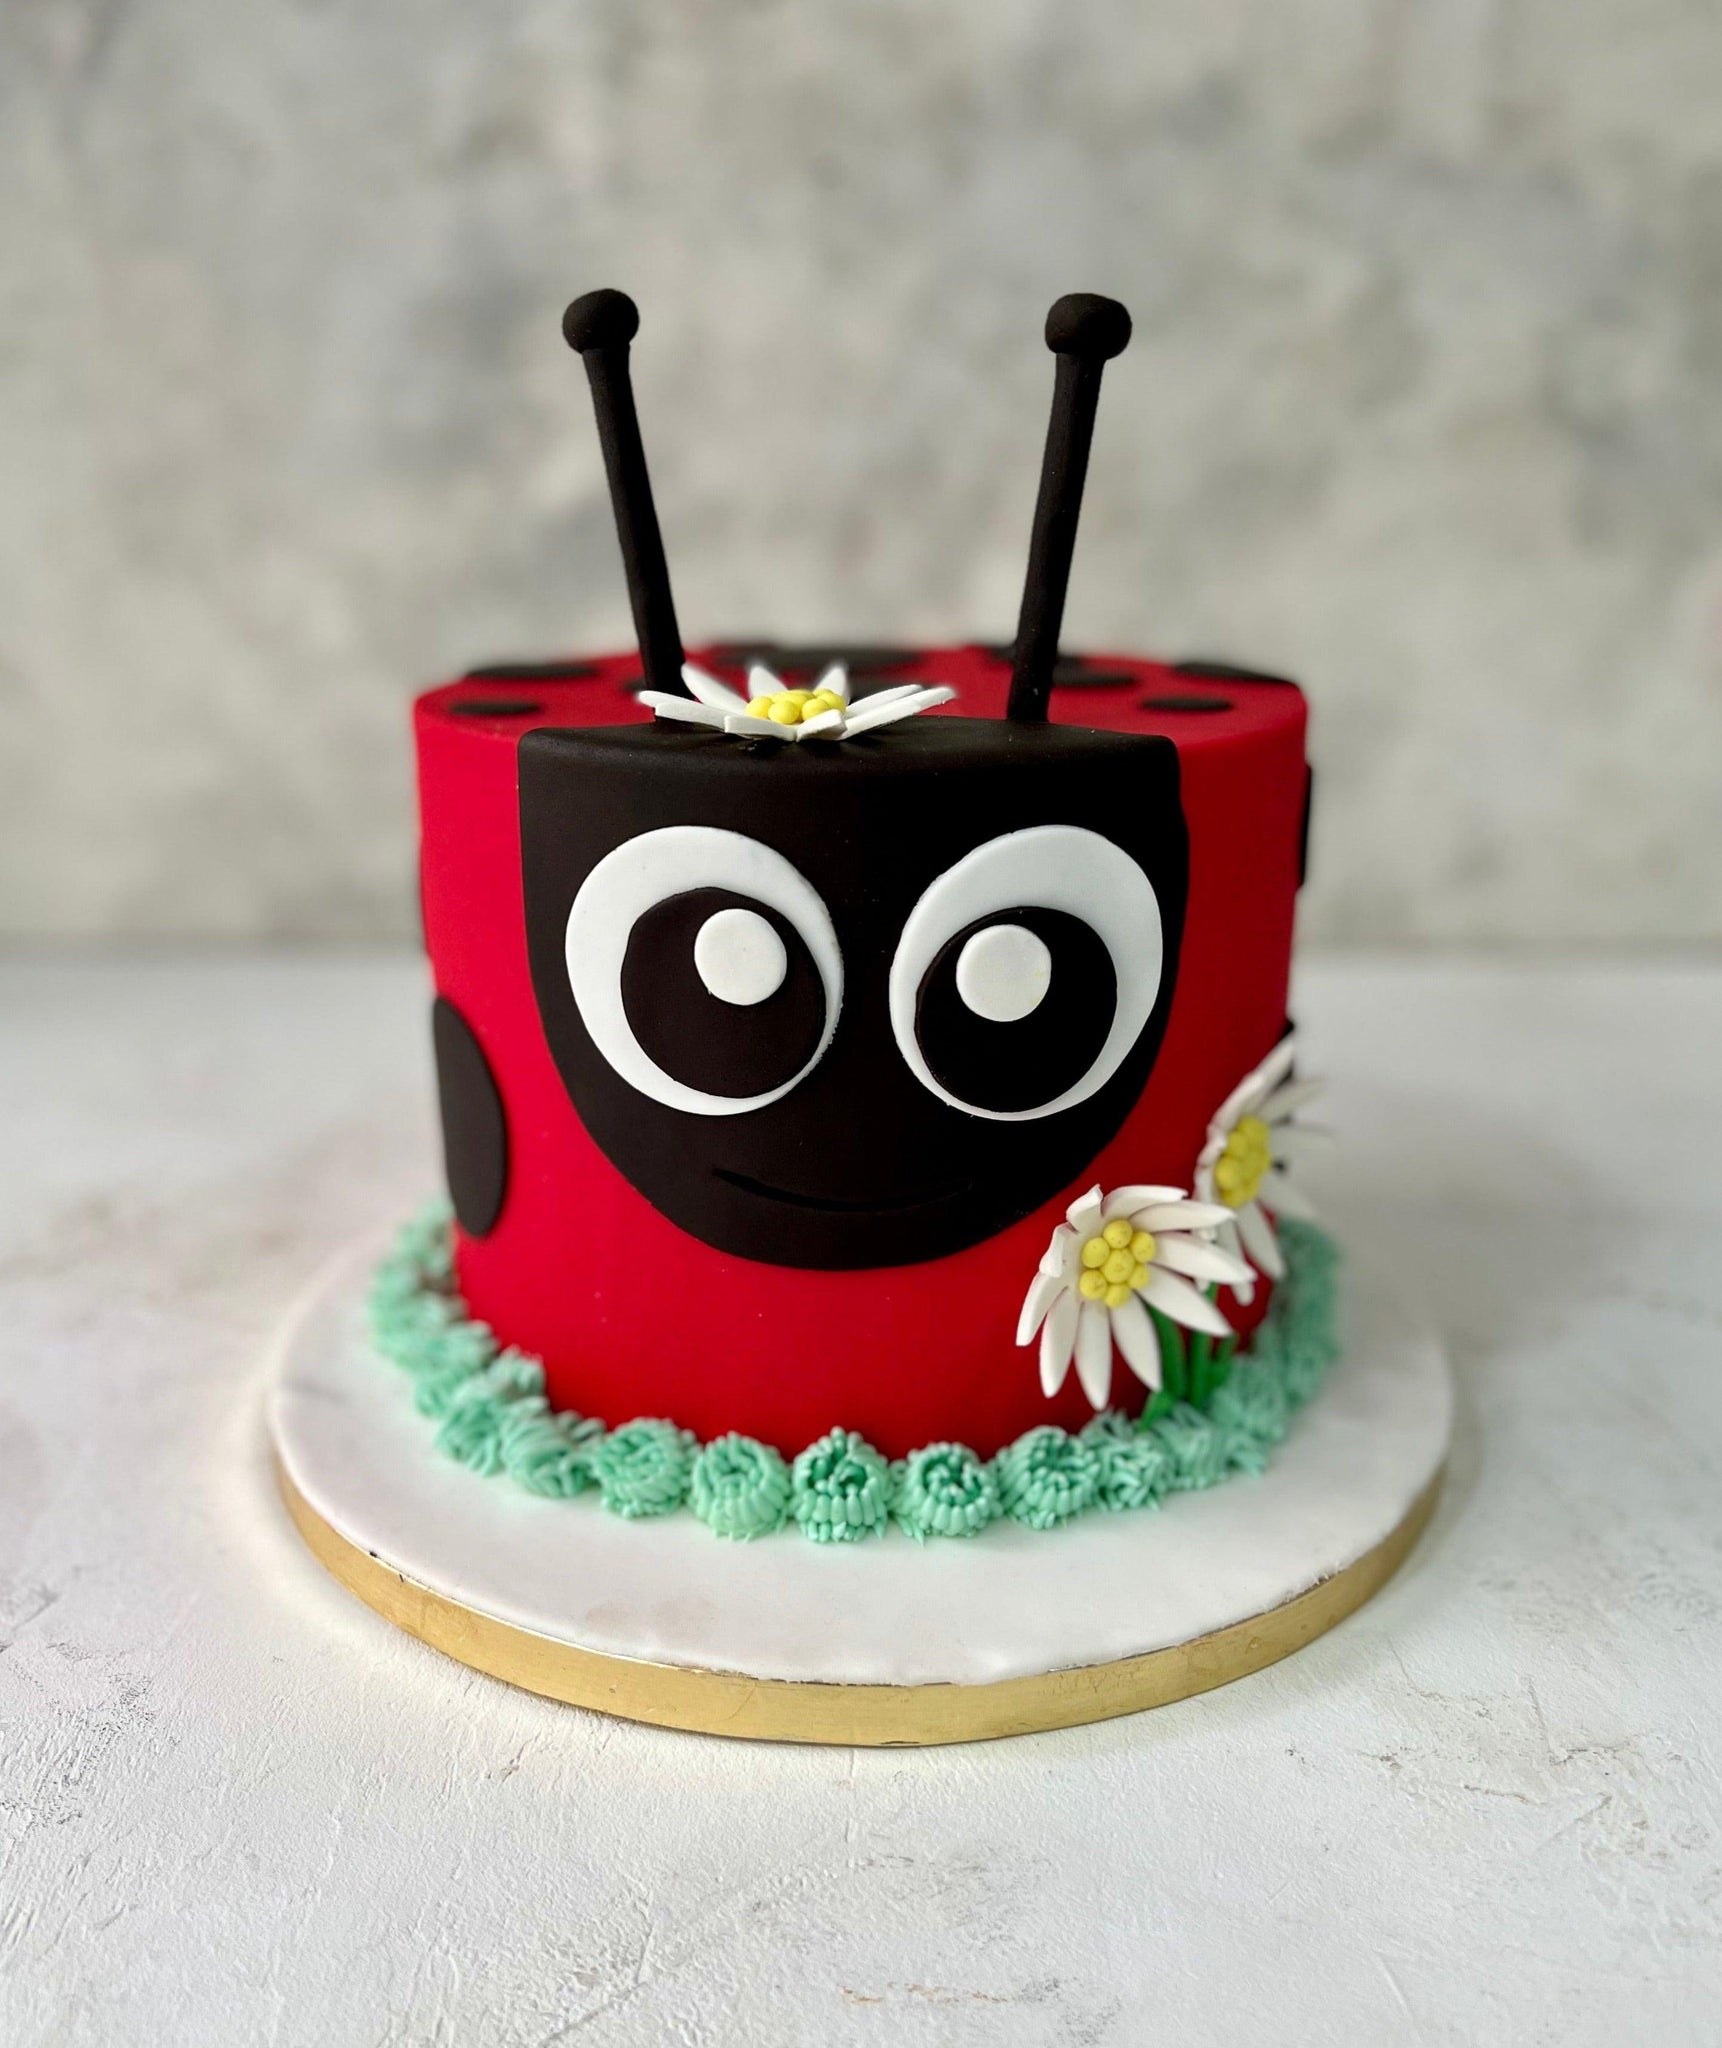 Hazelden_Bakes - A bug themed cake, ofcourse all anatomically accurate down  to the colour 🥴😂 but super cute for a little ones birthday! #cake  #vanillacake #greencake #bugcake #insectcake #bugs #insects  #buttercreamcake #birthdaycake #